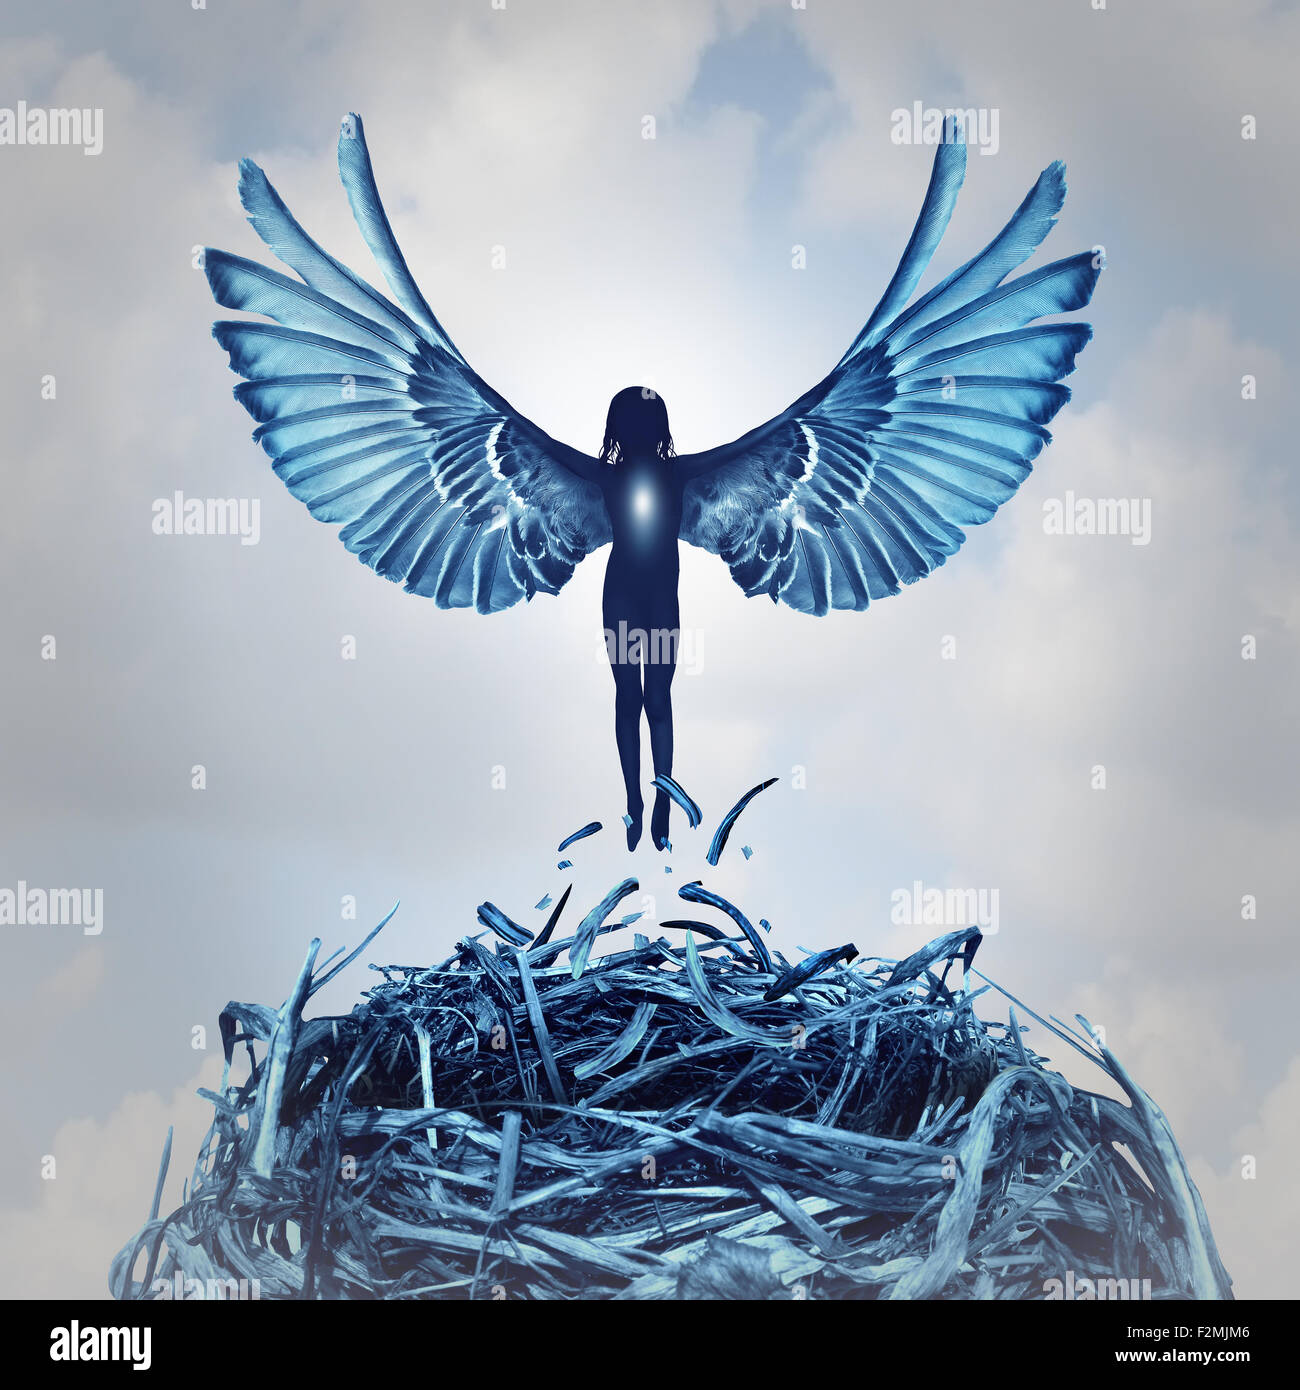 Angel concept and angelic metaphor as a human with open wings rising out of a nest into the clouds as a symbol of hope and the aspirations of life and to ascend to personal learning achievement. Stock Photo